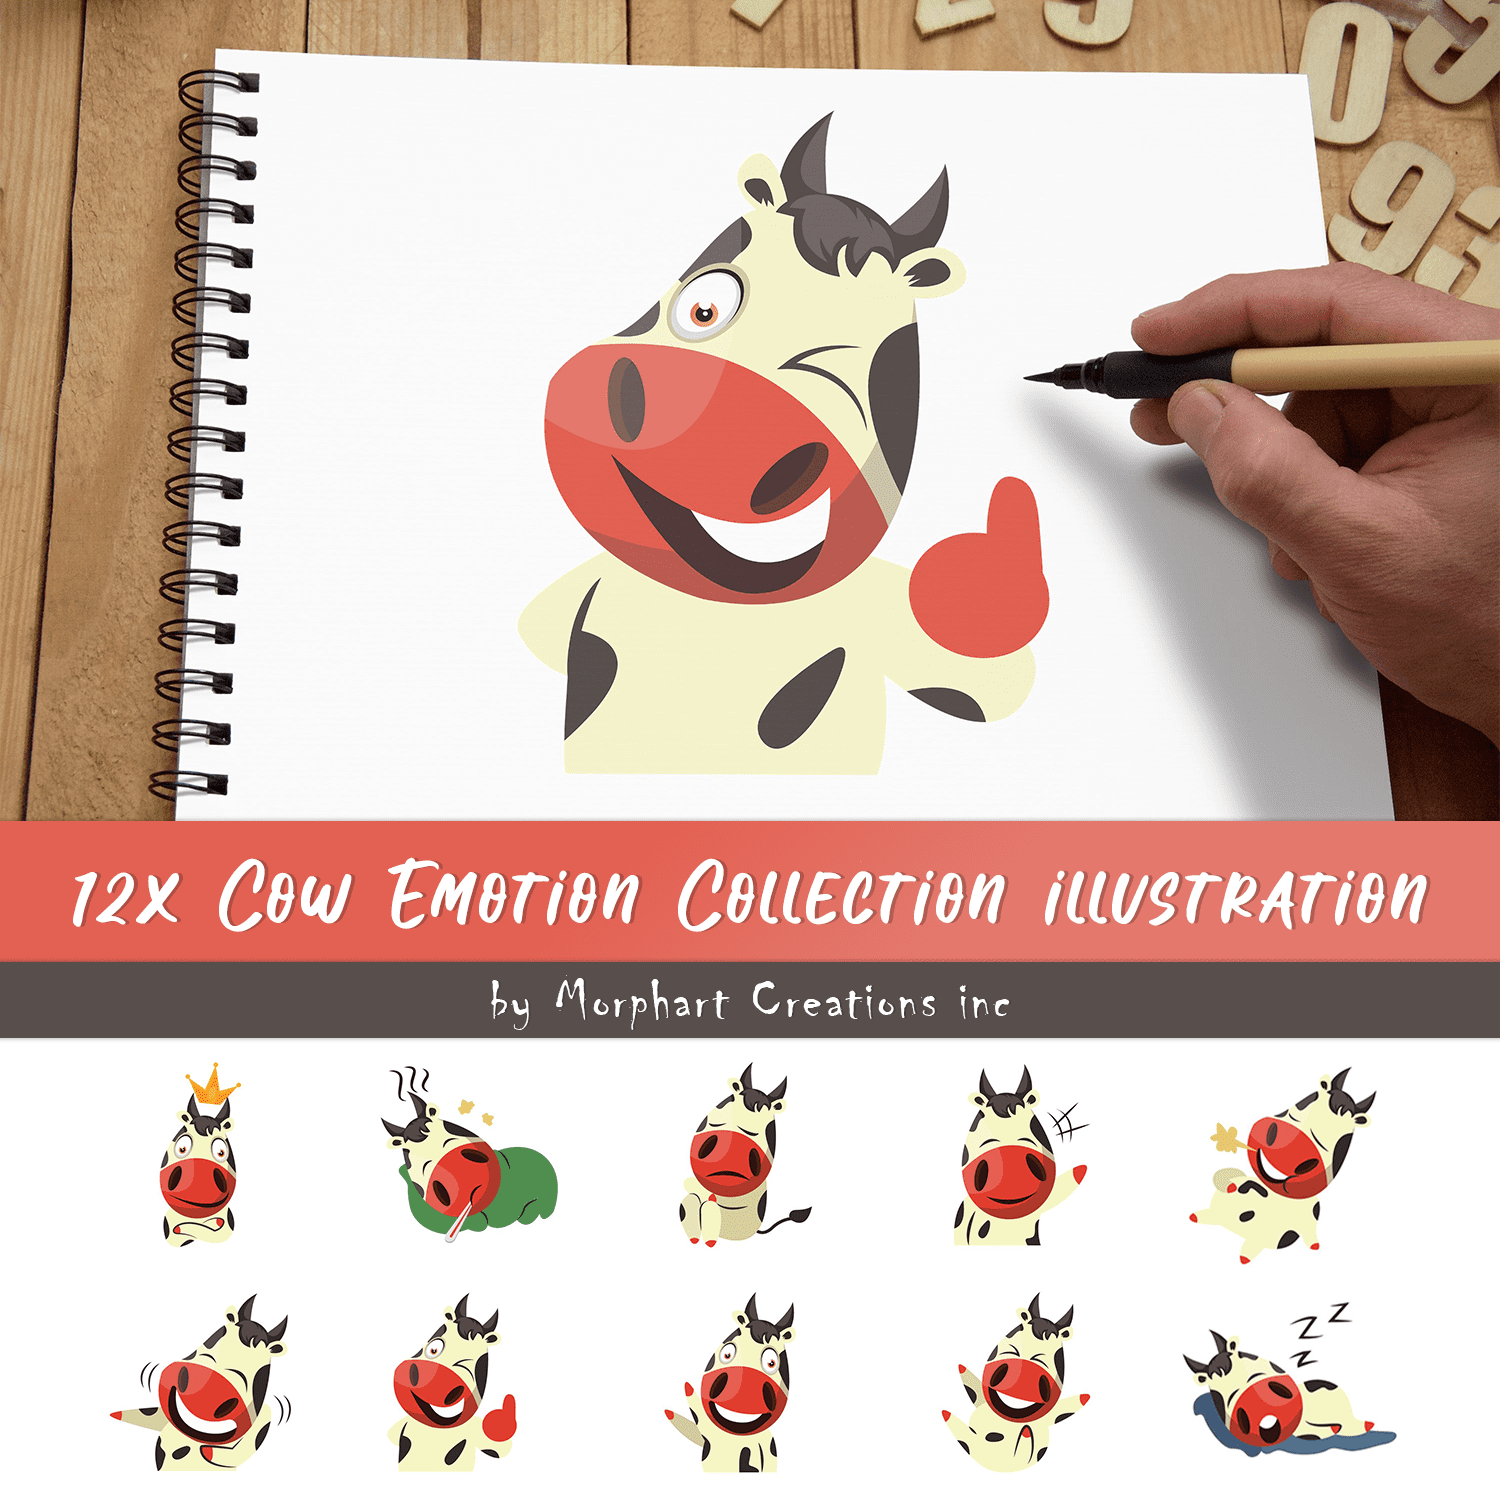 A selection of beautiful images of cow emoticons.